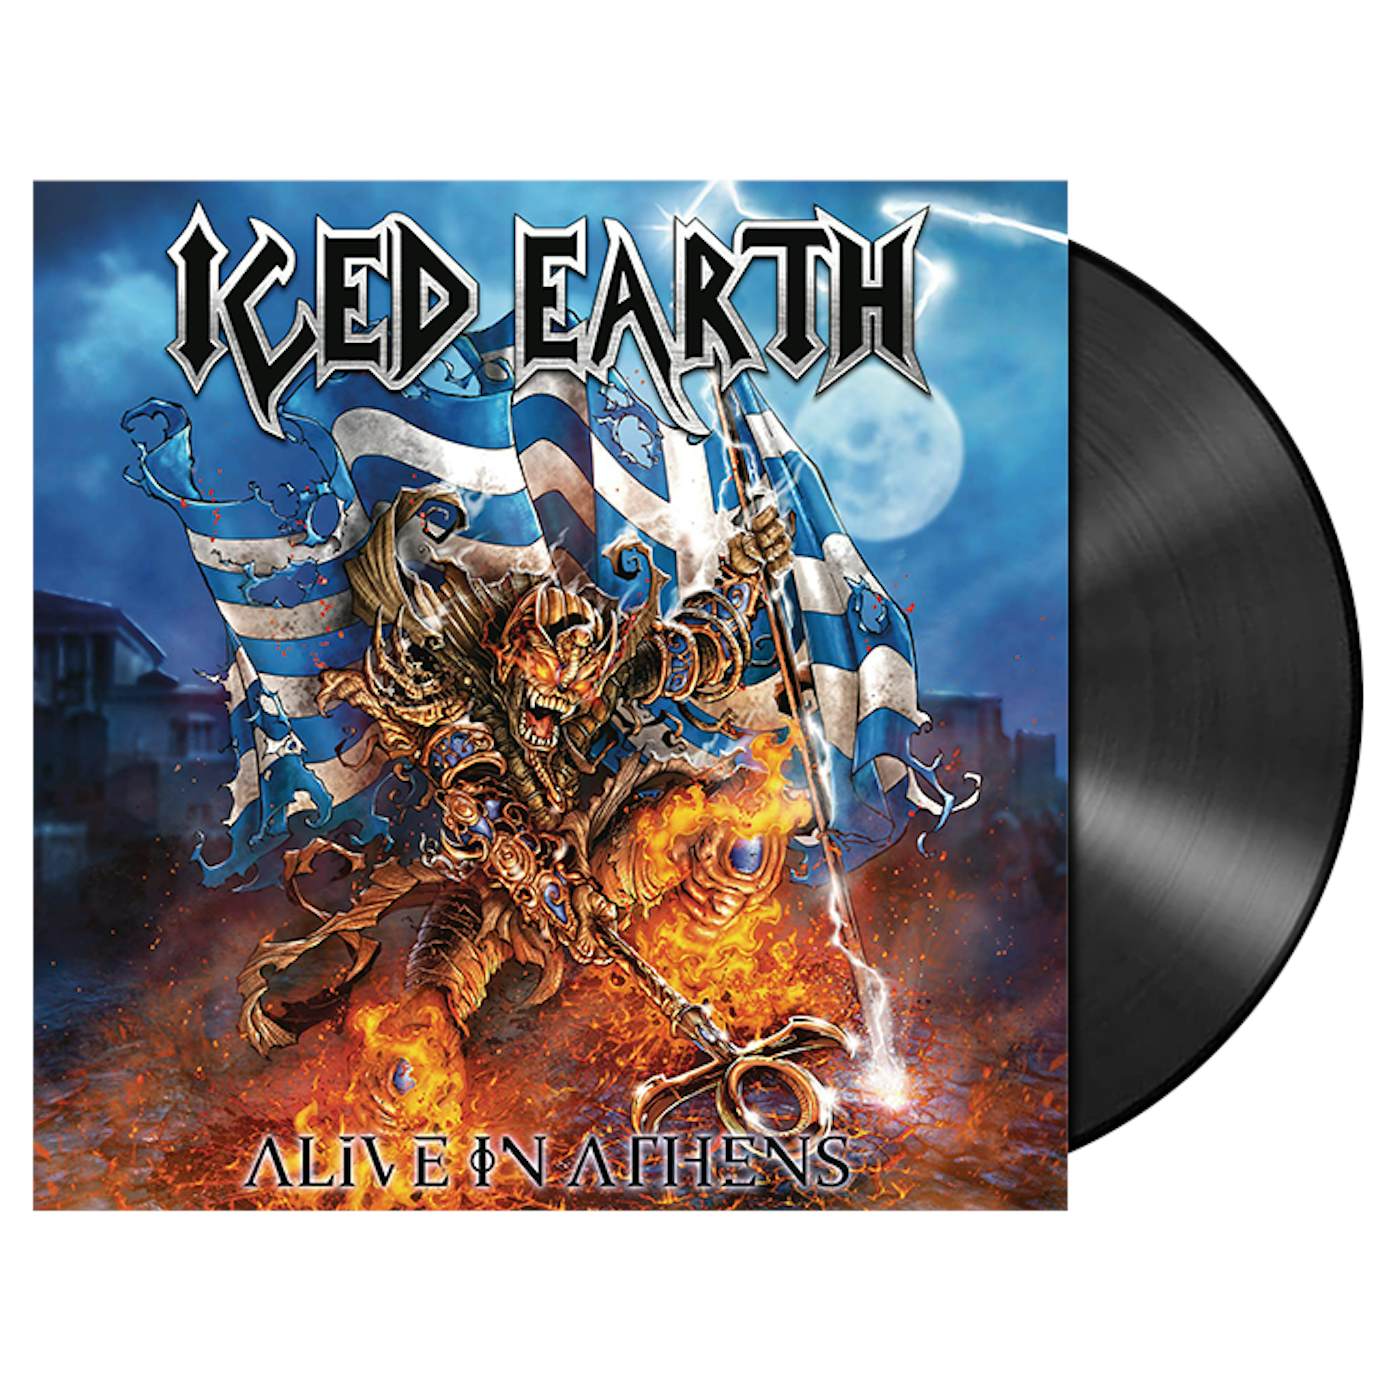 ICED EARTH - 'Alive In Athens' 5LP Box Set (Vinyl)